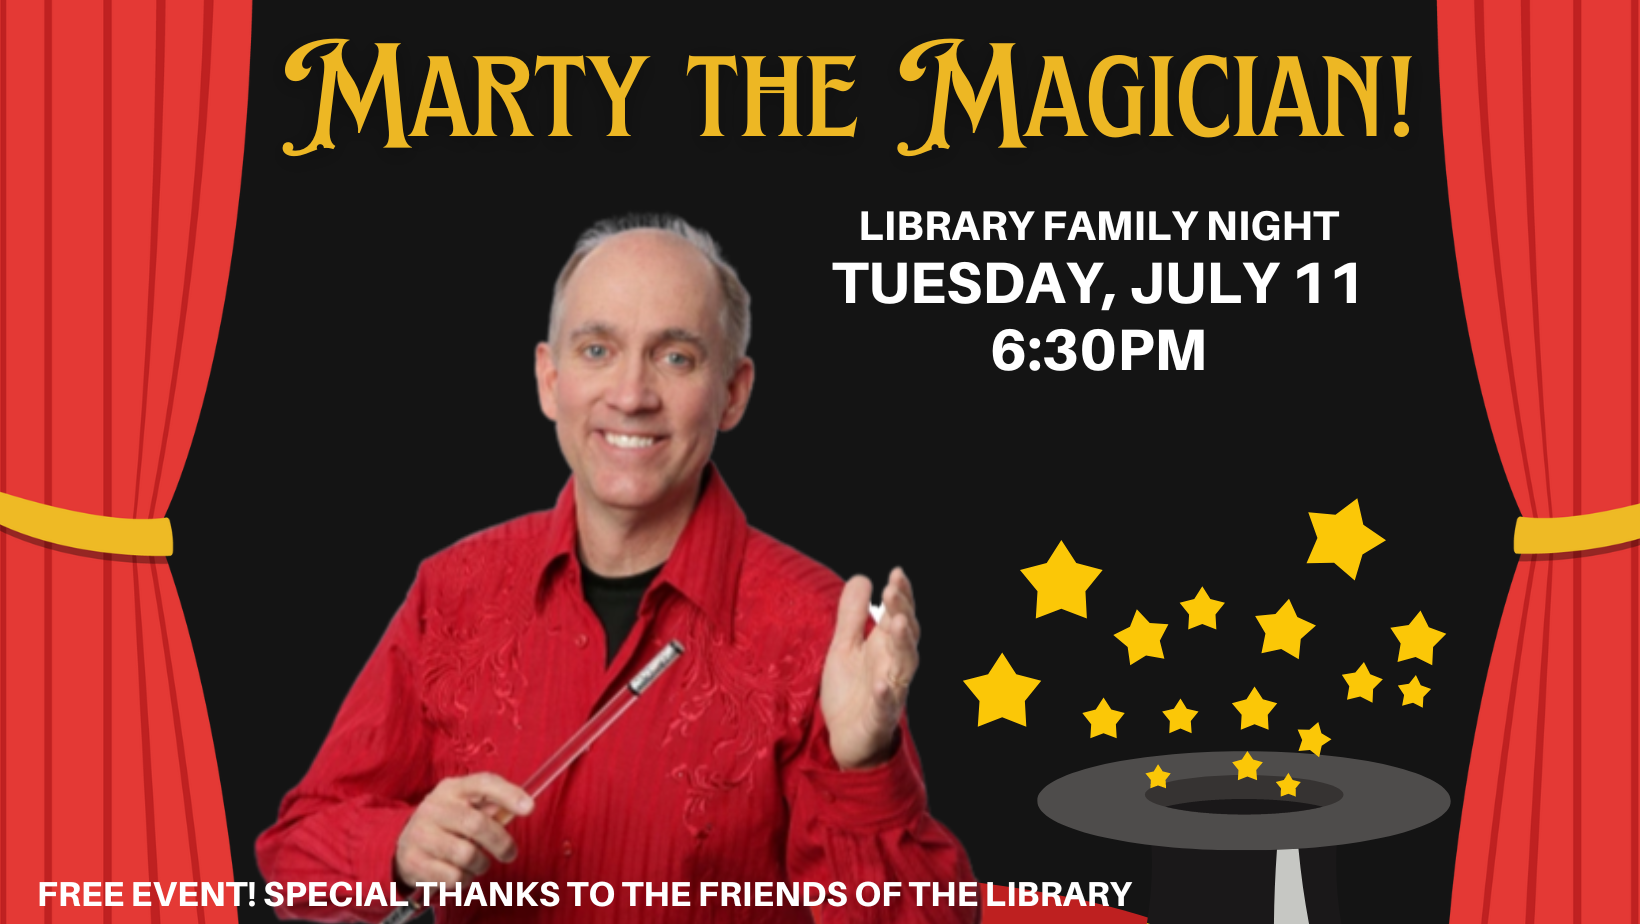 Magician Marty Hahne